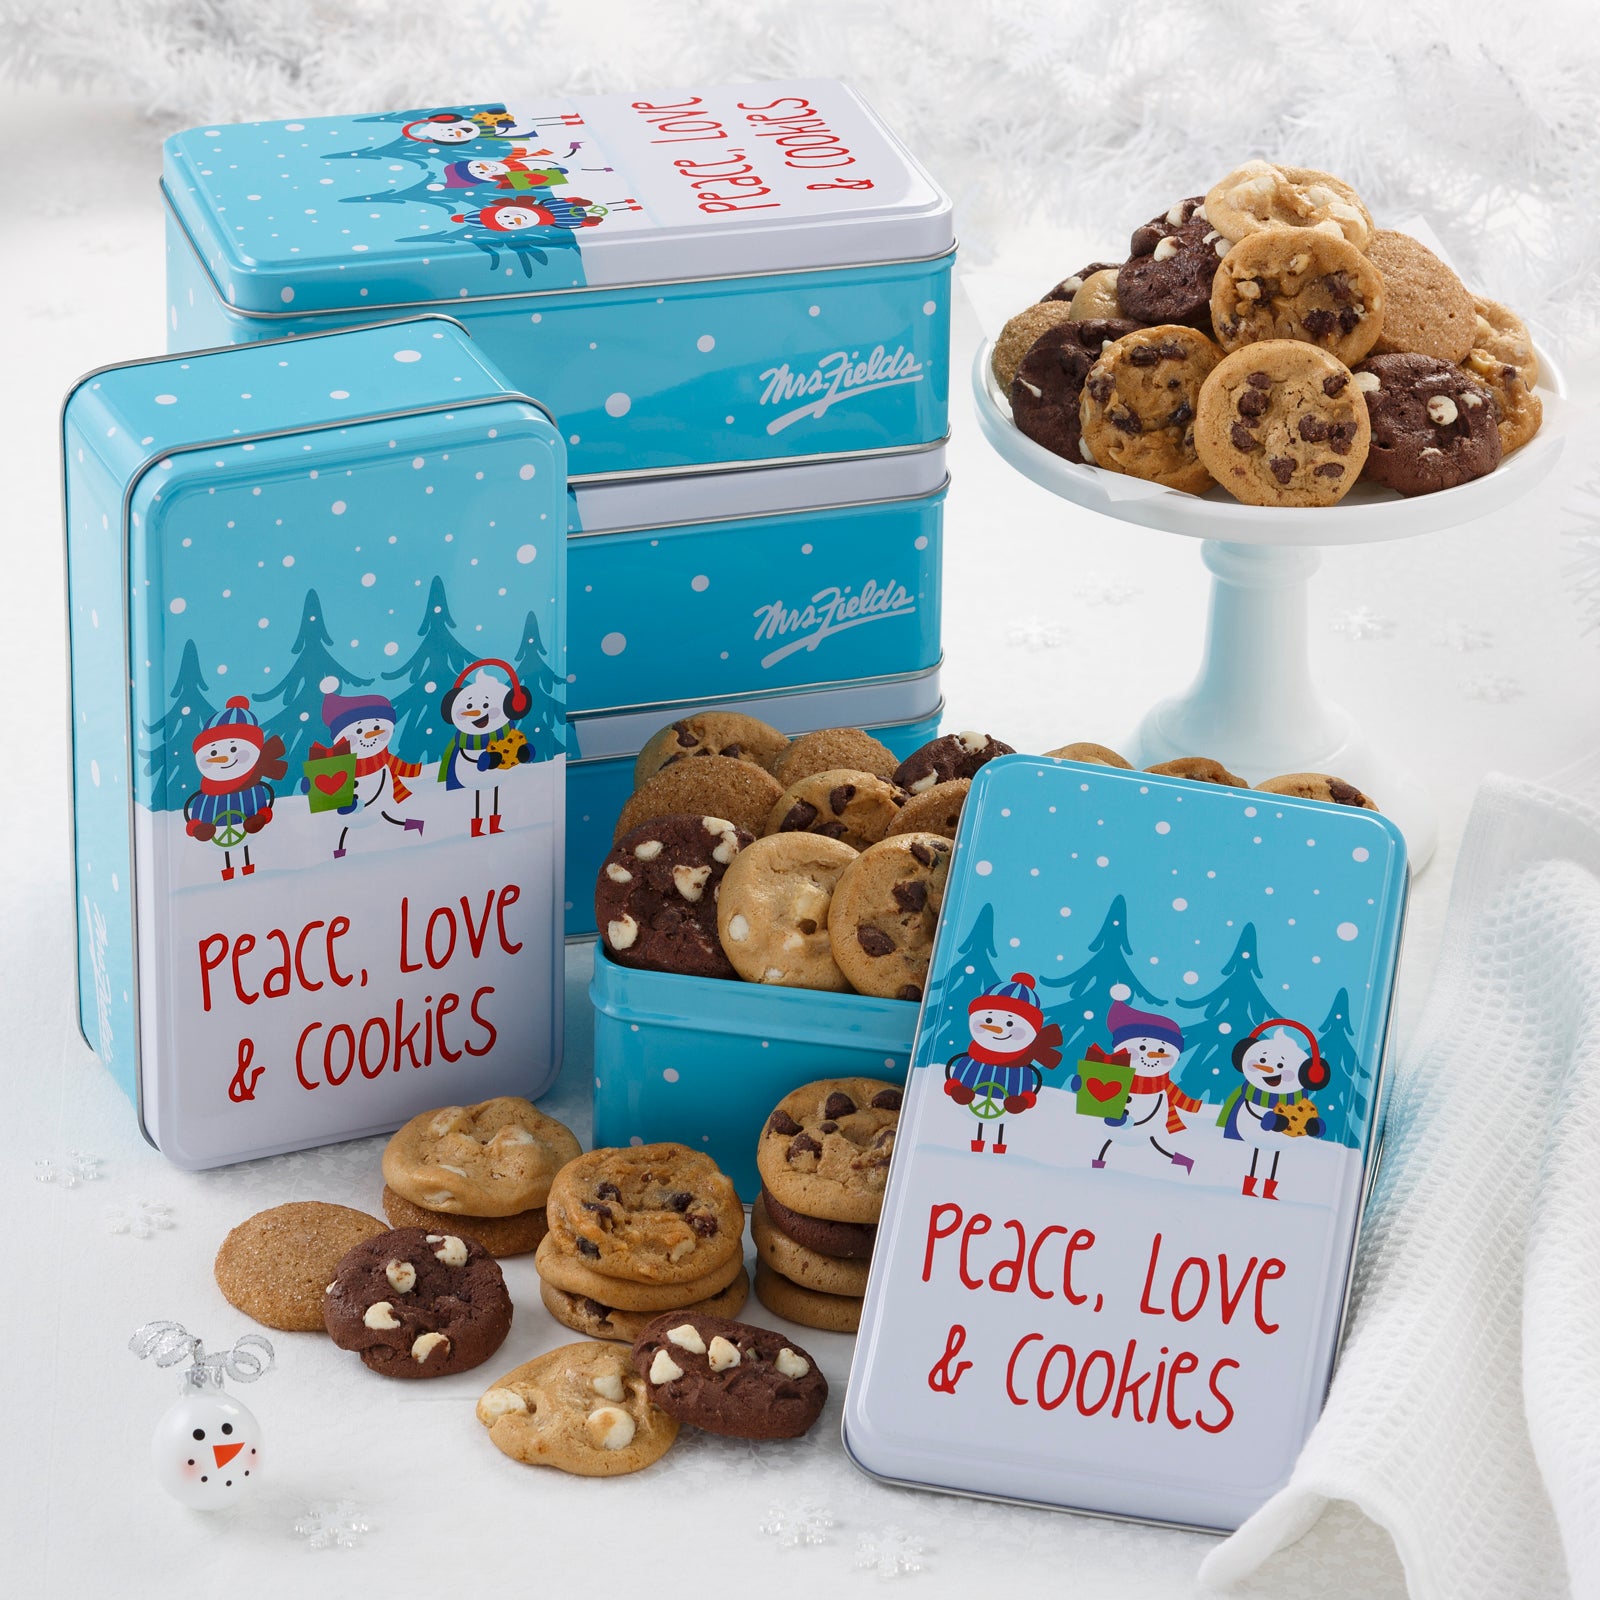 Five tins of Peace, Love and Cookies sentiment on gift tins with snowman friends as decorations. This tin is filled with an assortment of Nibblers®